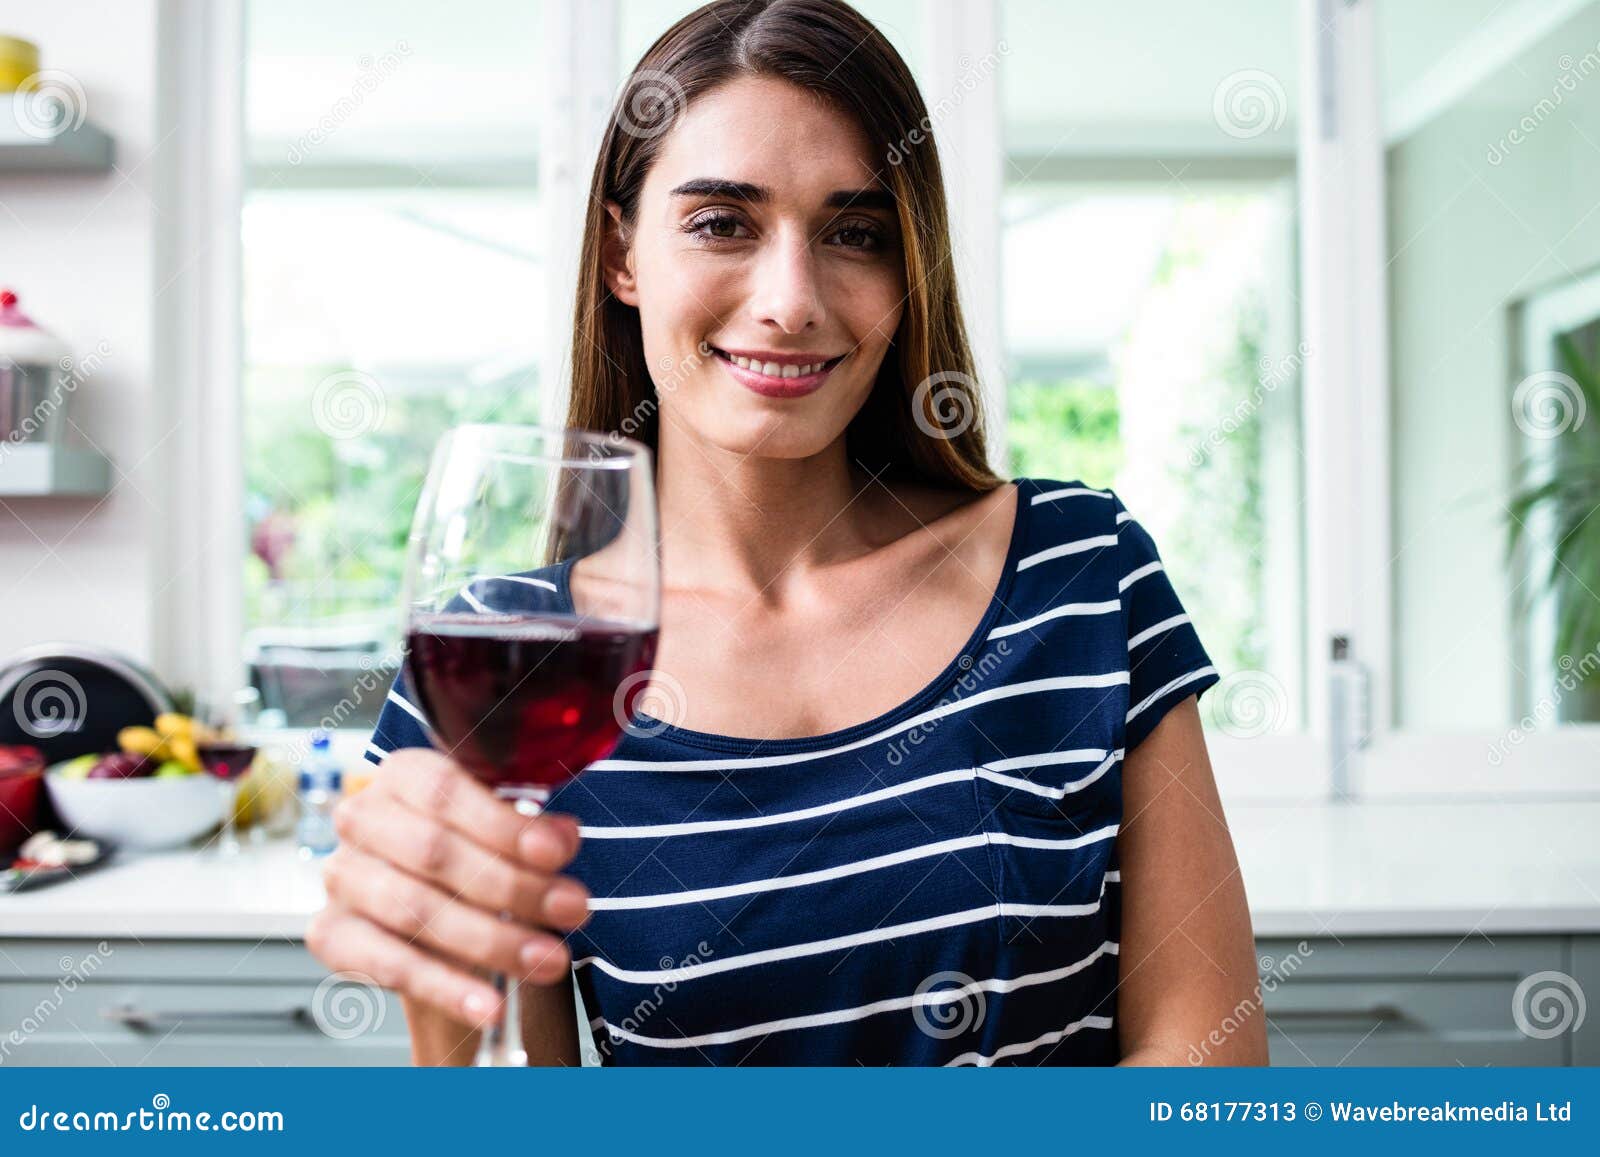 Portrait of Smiling Young Woman Holding Red Wine Glass Stock Image ...